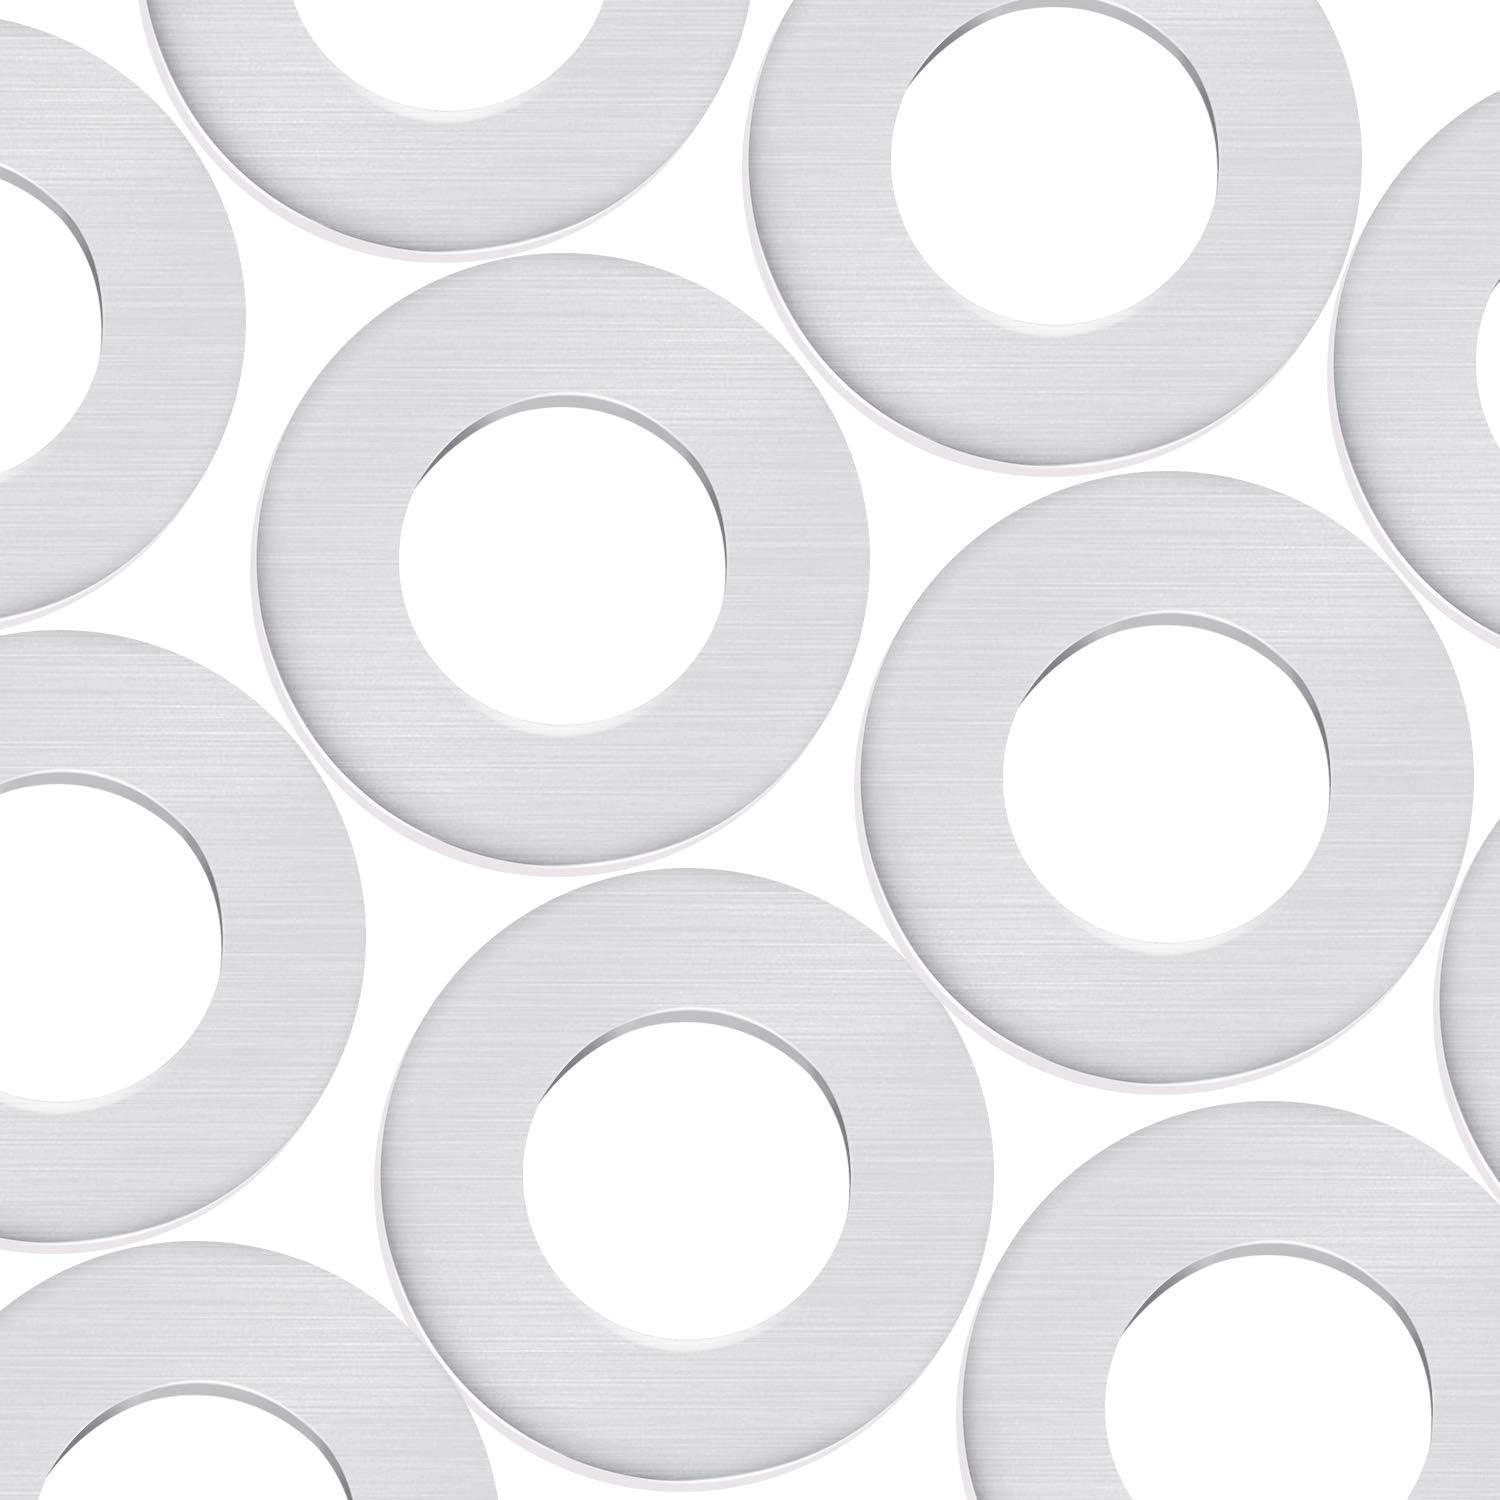 100pcs Aluminum Metal Stamping Blanks 20x10x1.5mm Aluminum Washers Stamping  Tags DIY Jewelry Making – the best products in the Joom Geek online store